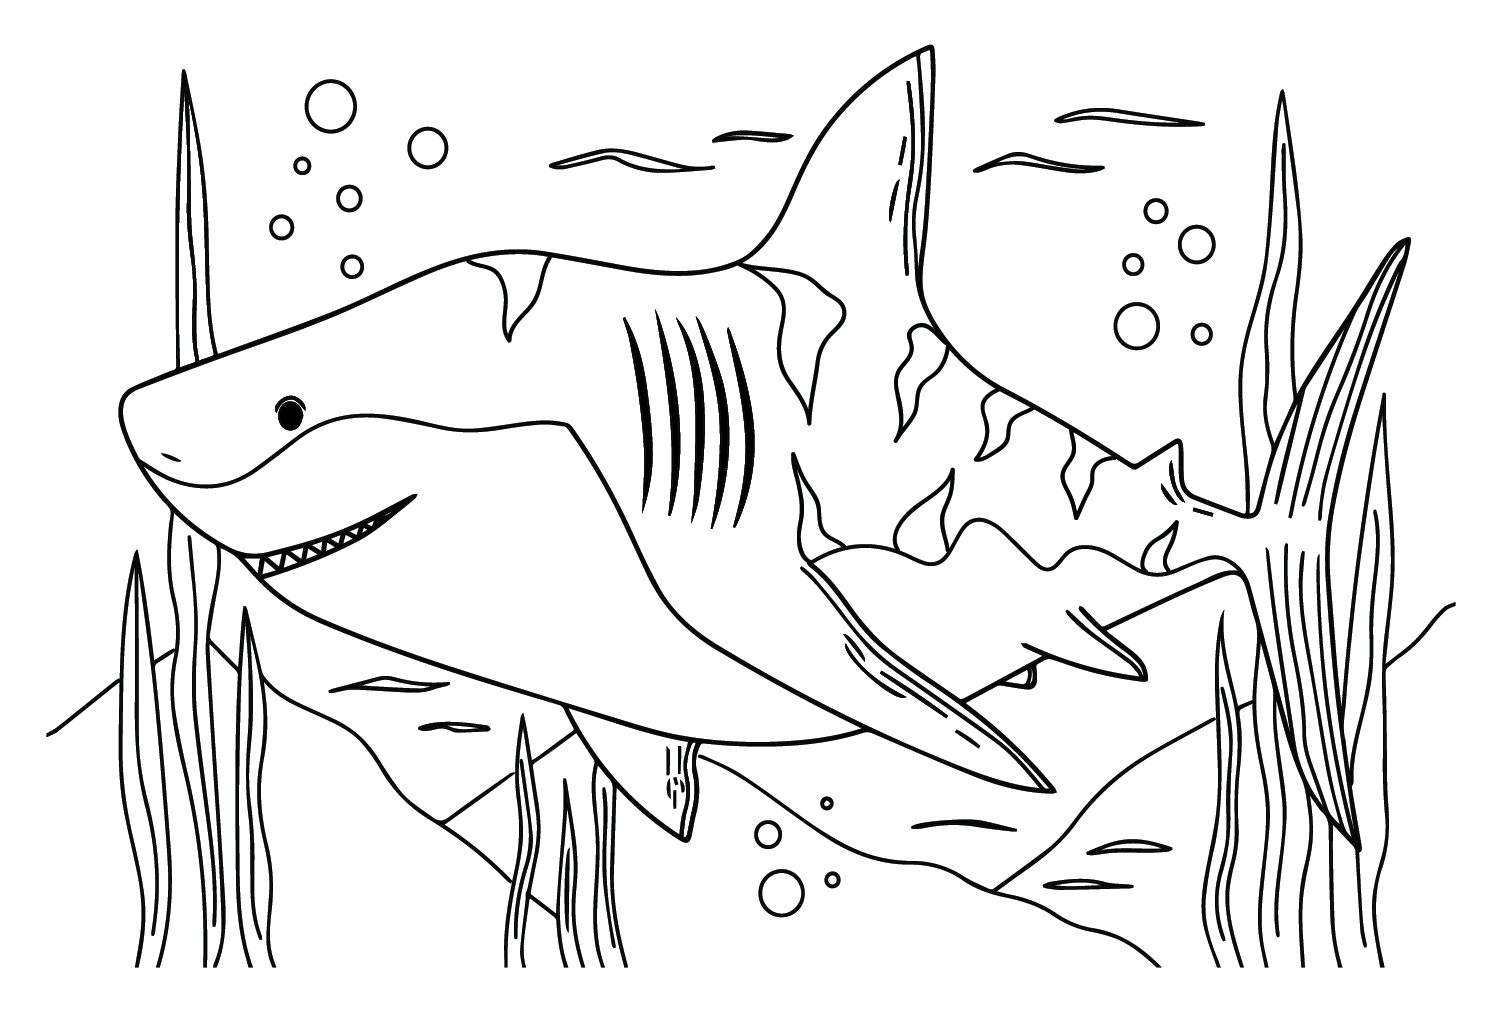 Big Tiger Shark Coloring Page - Free Printable Coloring Pages